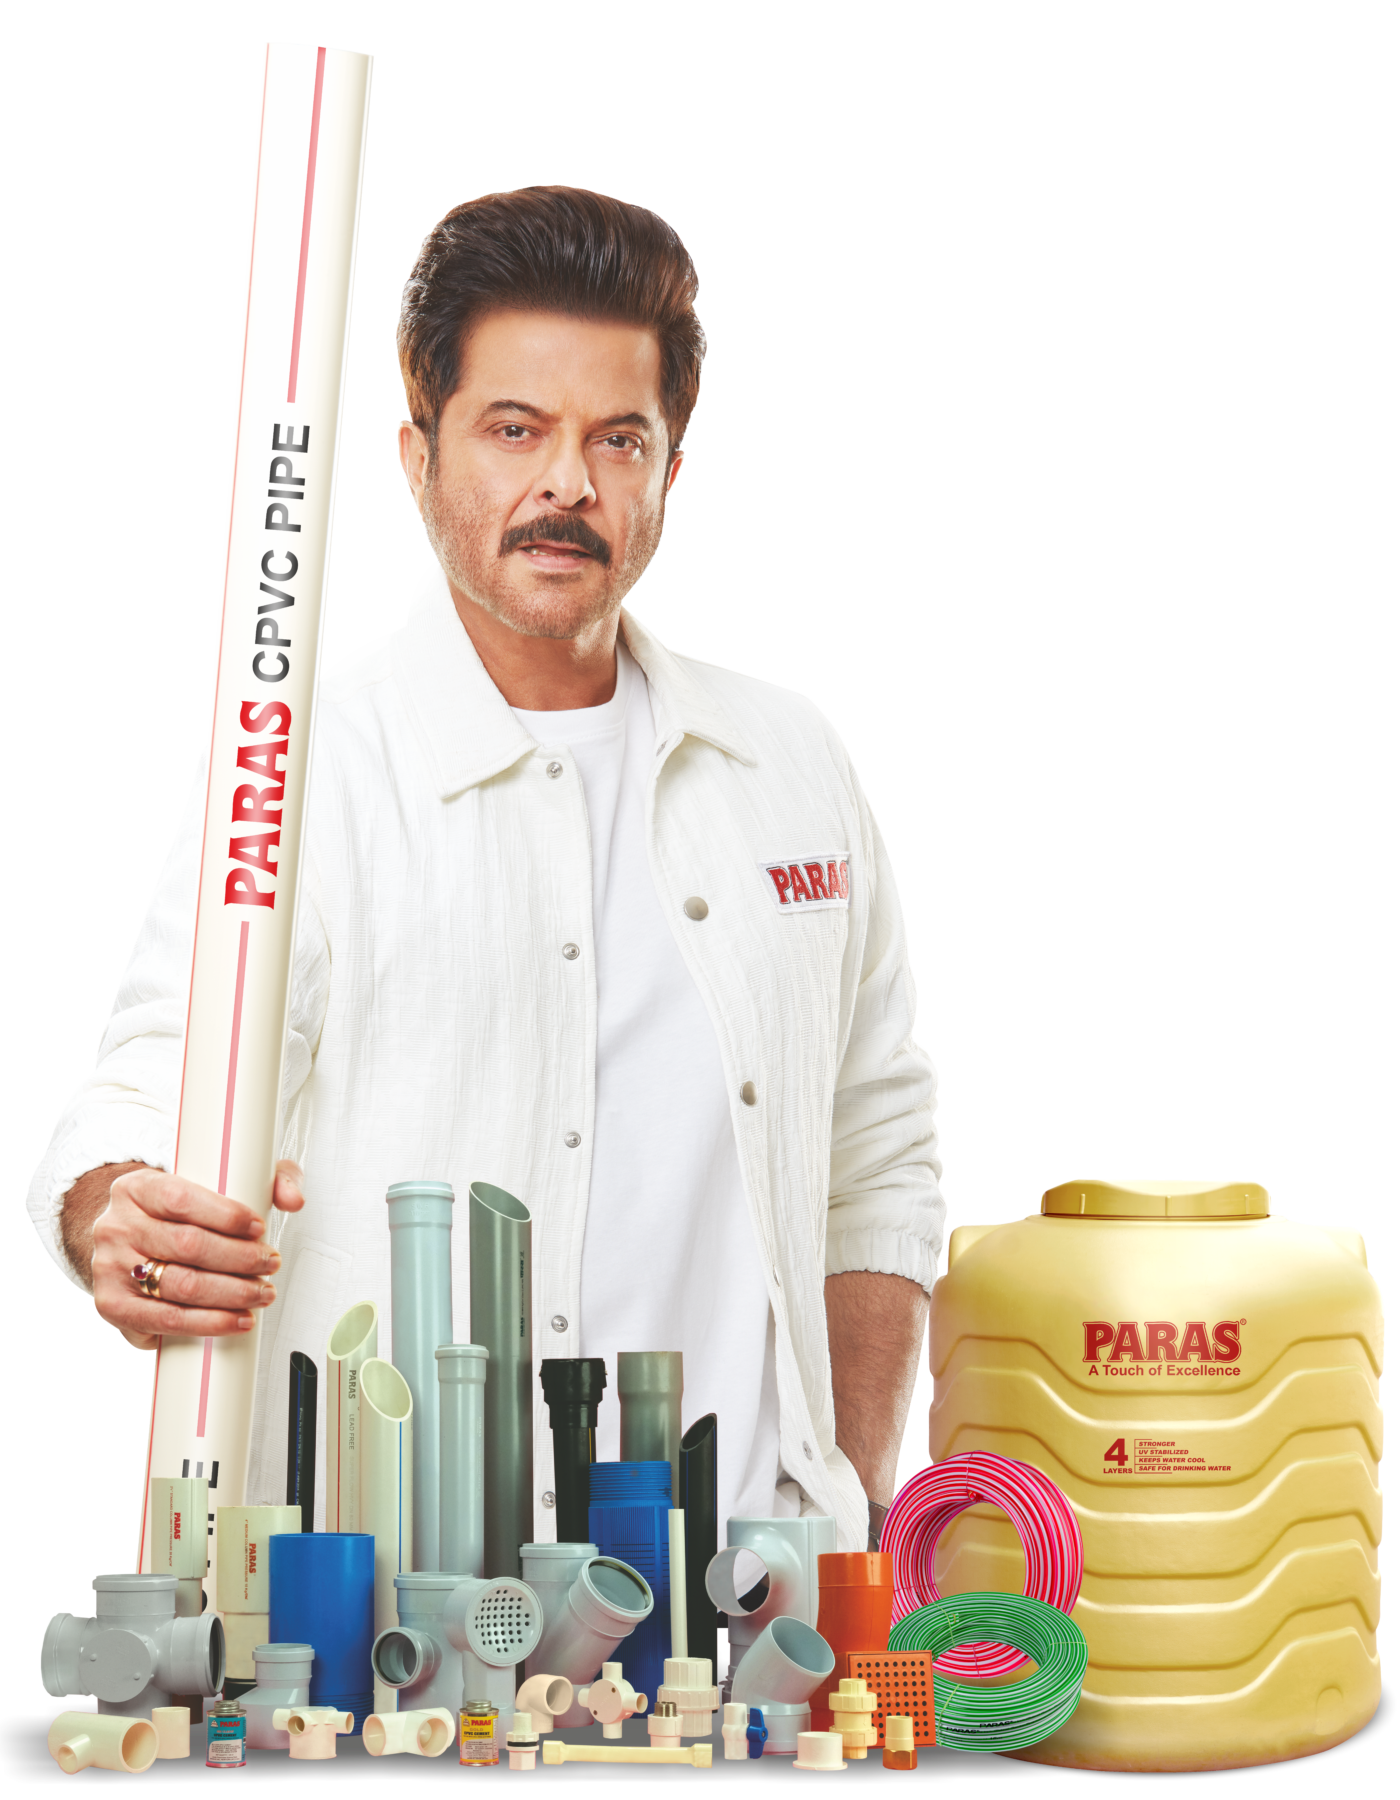 PLUMBING GROUP + TANK WITH ANIL KAPOOR